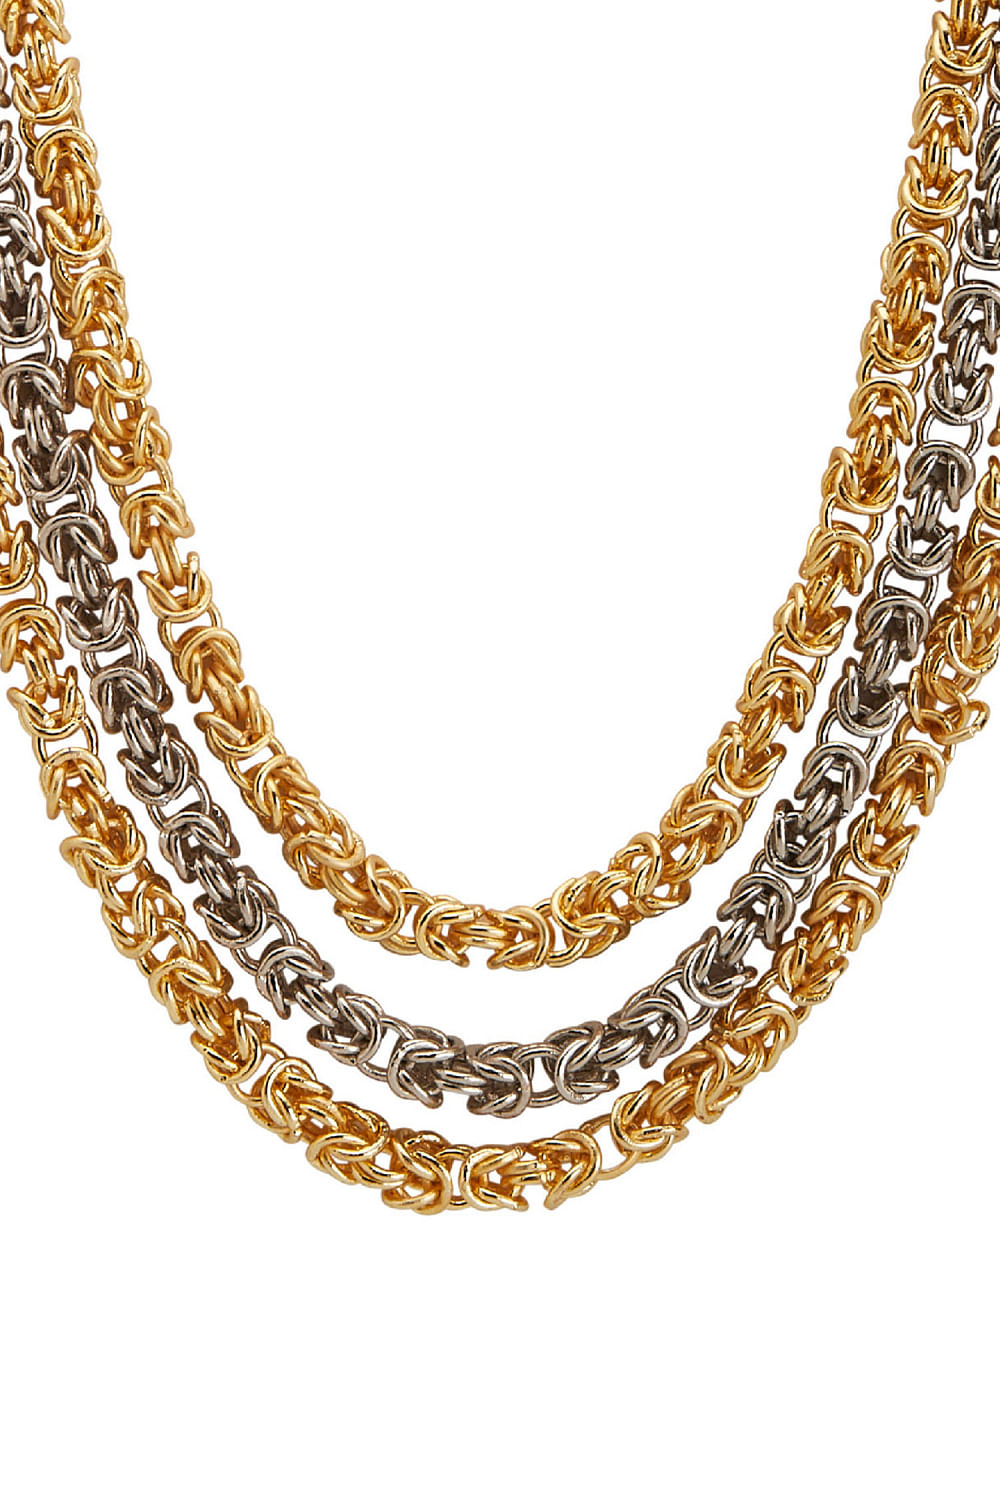 Gold Interlink Necklace | Womens jewelry necklace, Gold necklace, Necklace  designs